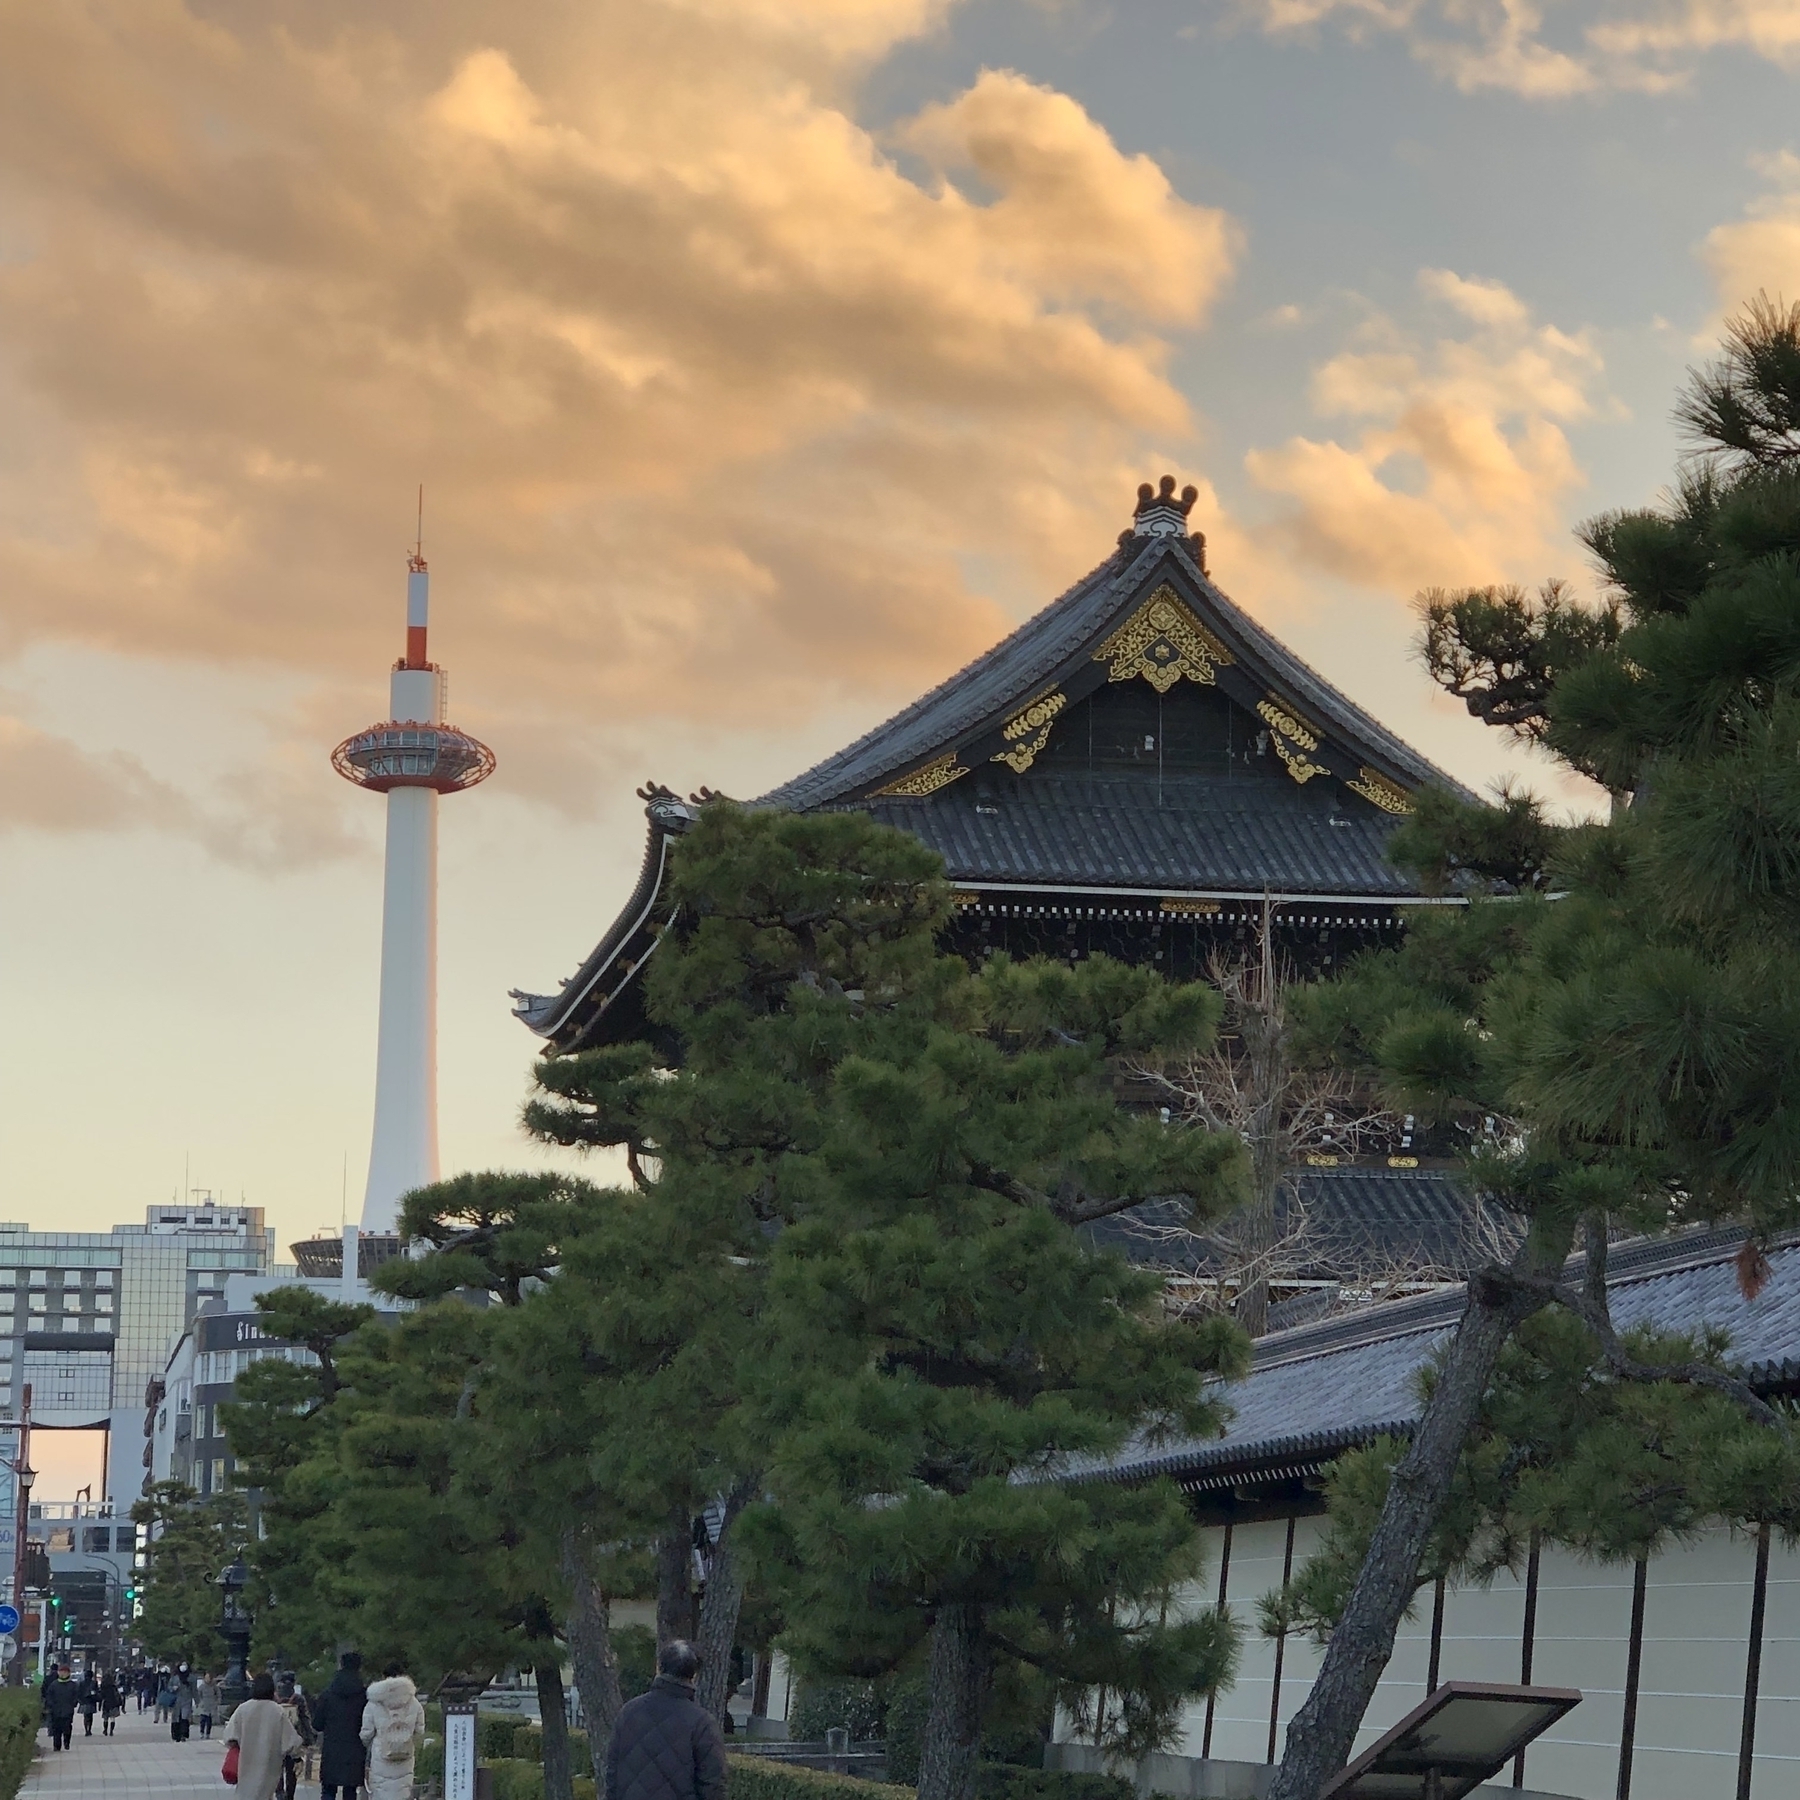 In the foreground the peaked roof of an old Japanese temple is visible over the top of trees lining a street. In the distant background a tall telecommunications tower with spire is visible.